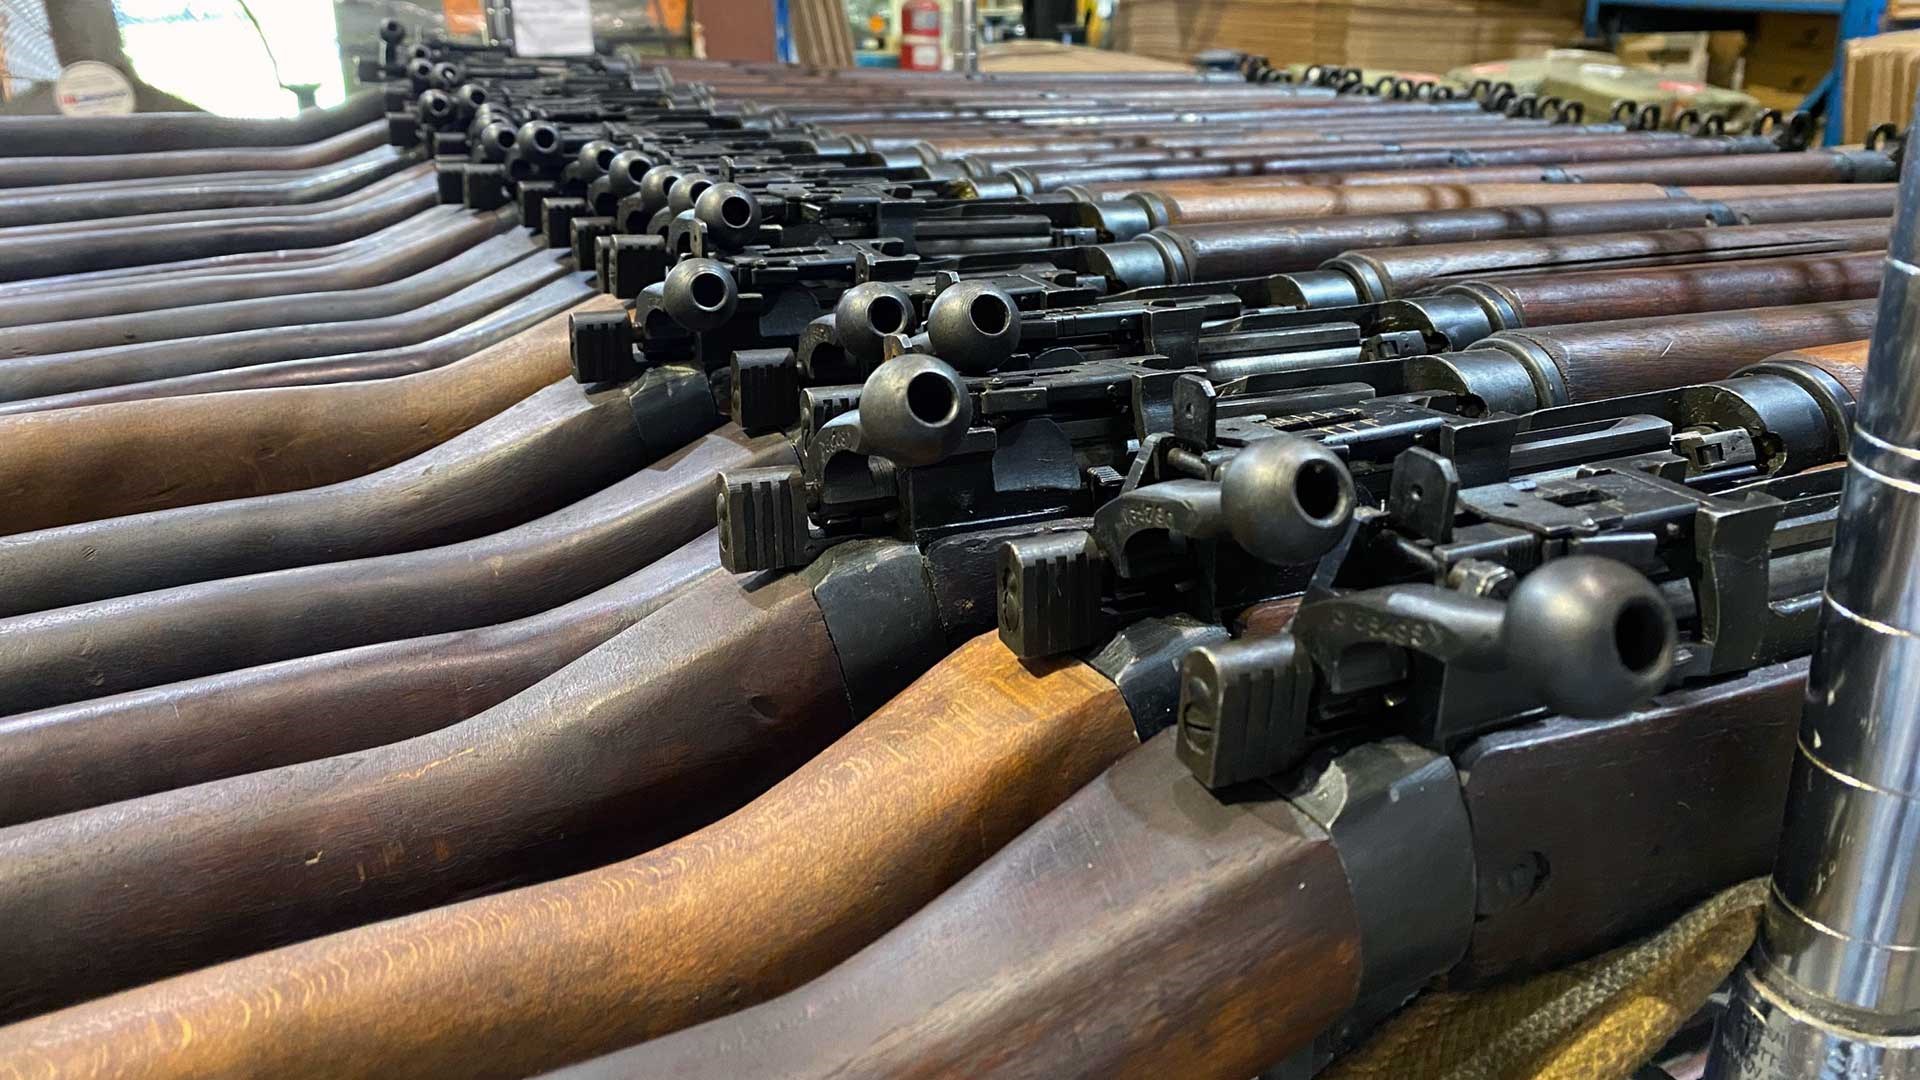 Rifles sorted for cleaning at the Navy Arms warehouse in West Virginia.